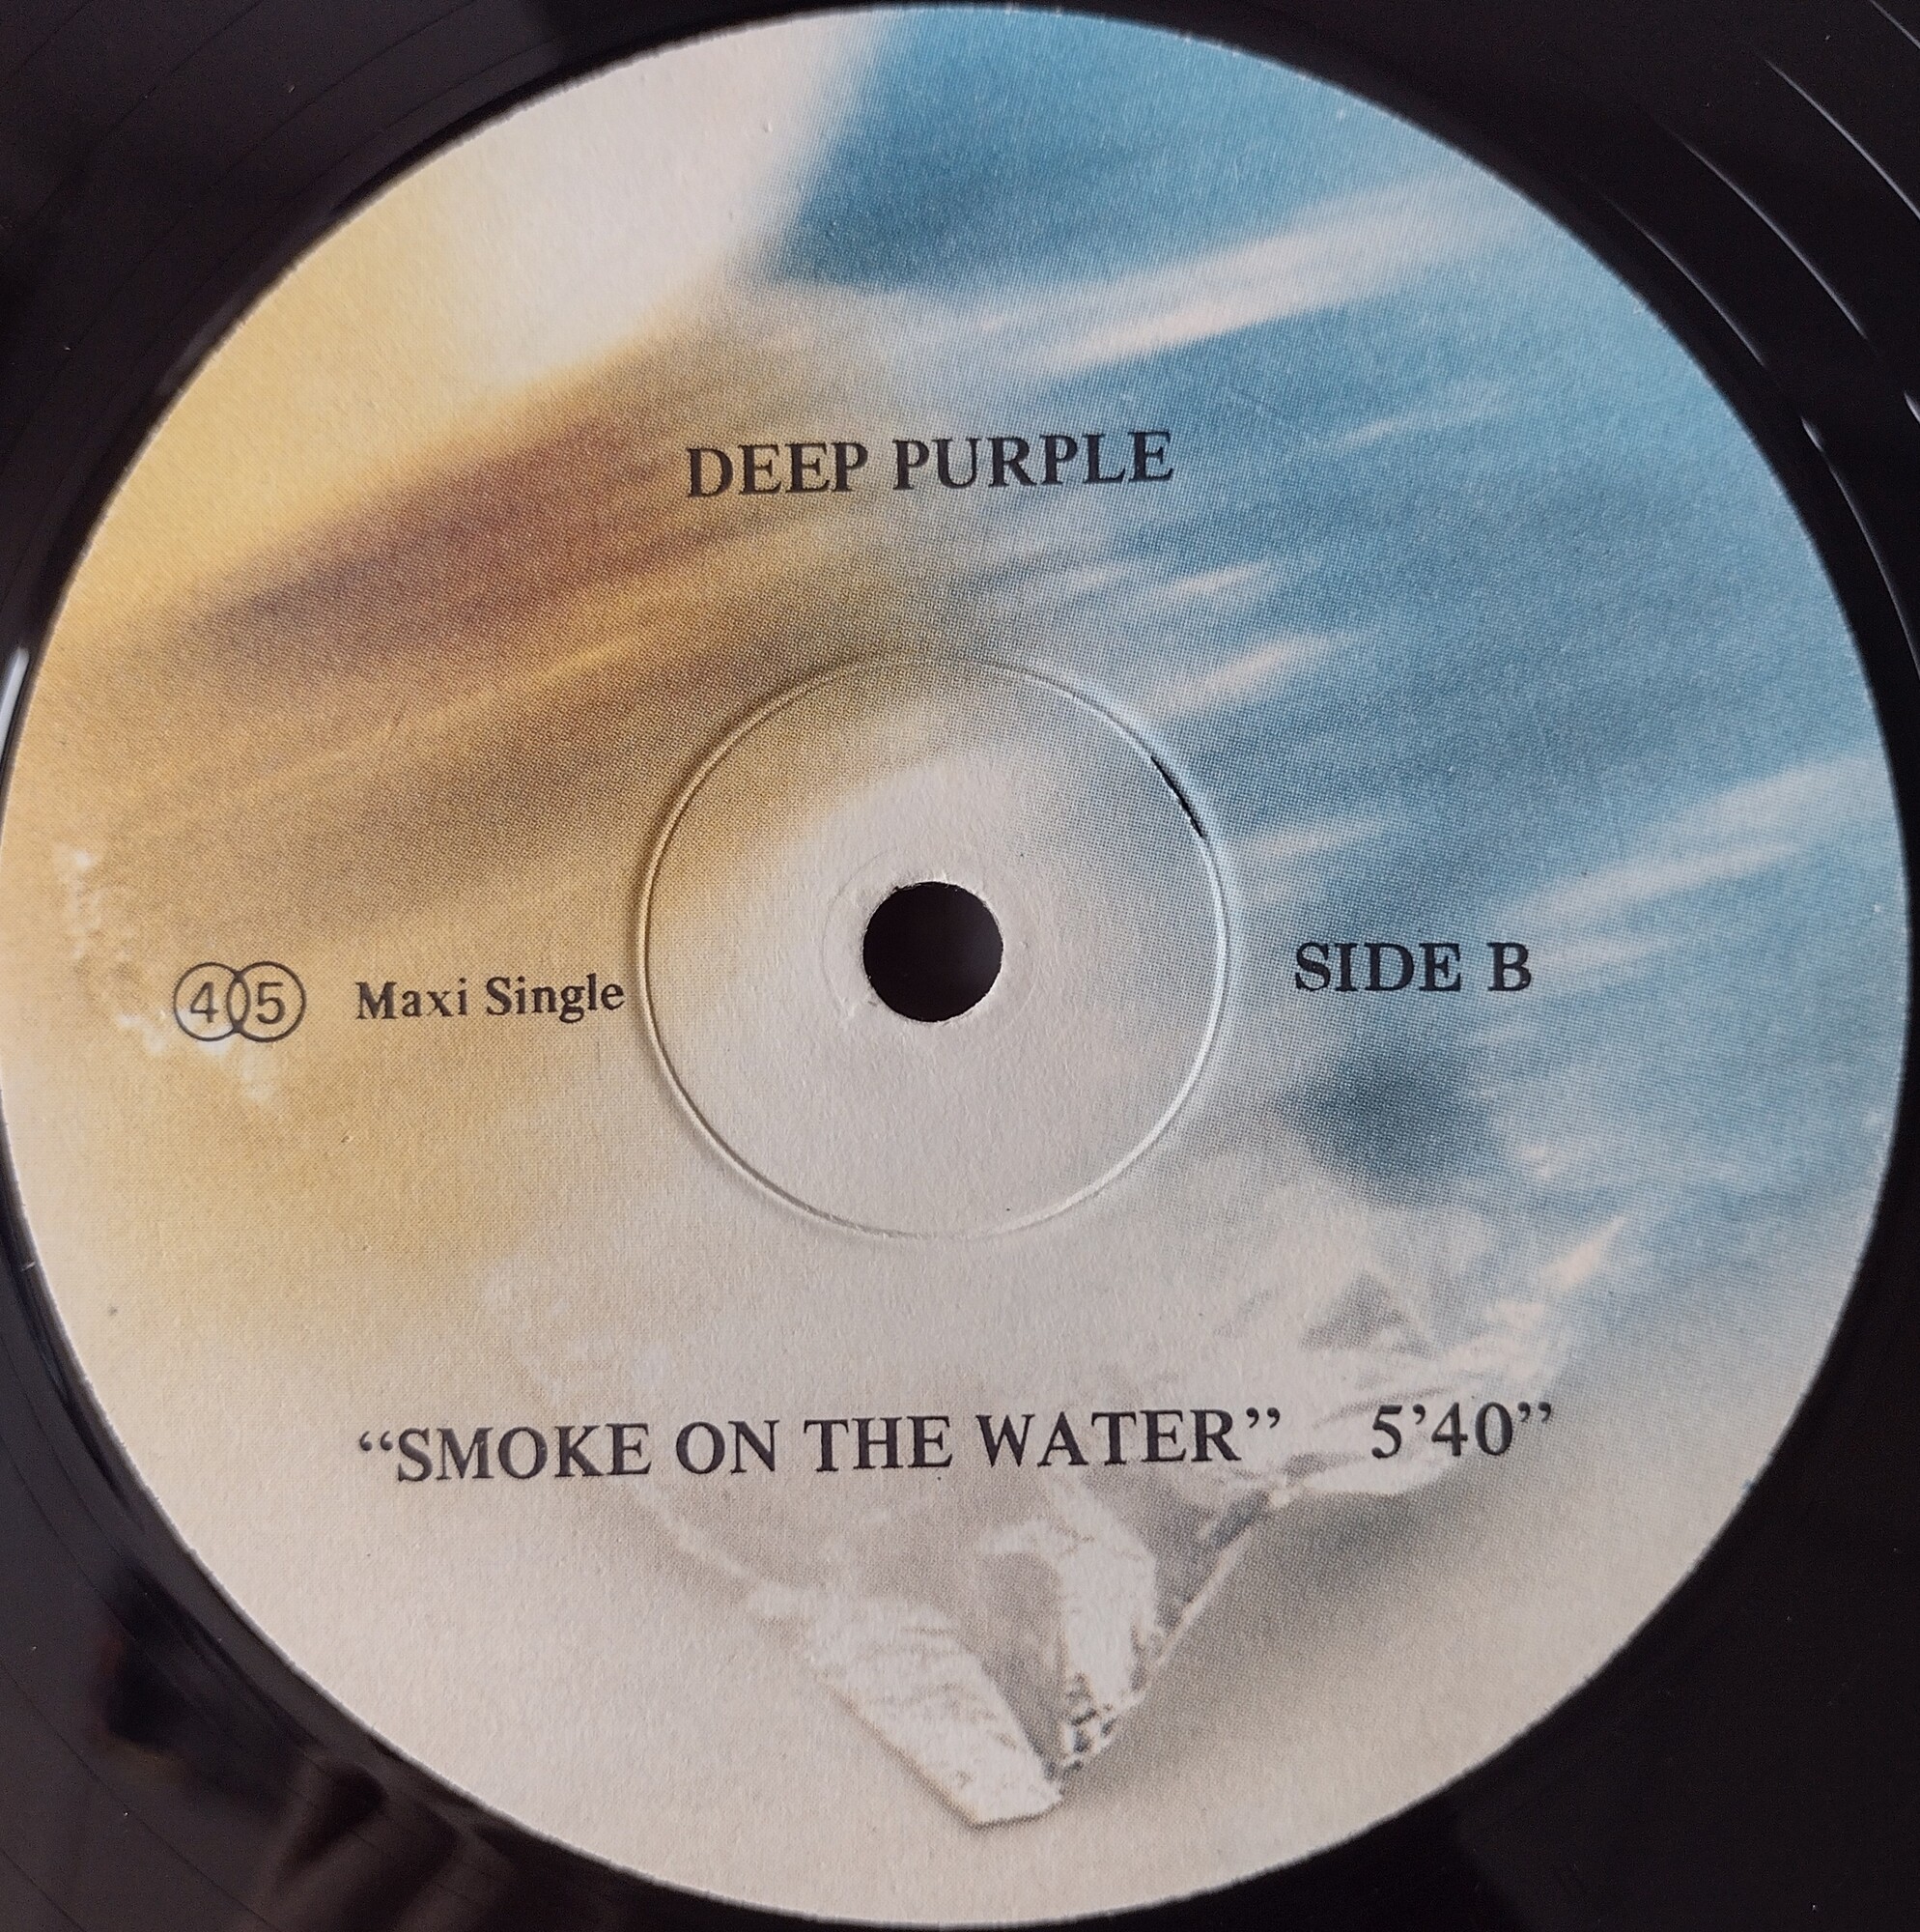 Foreigner — Urgent / Deep Purple — Smoke On The Water